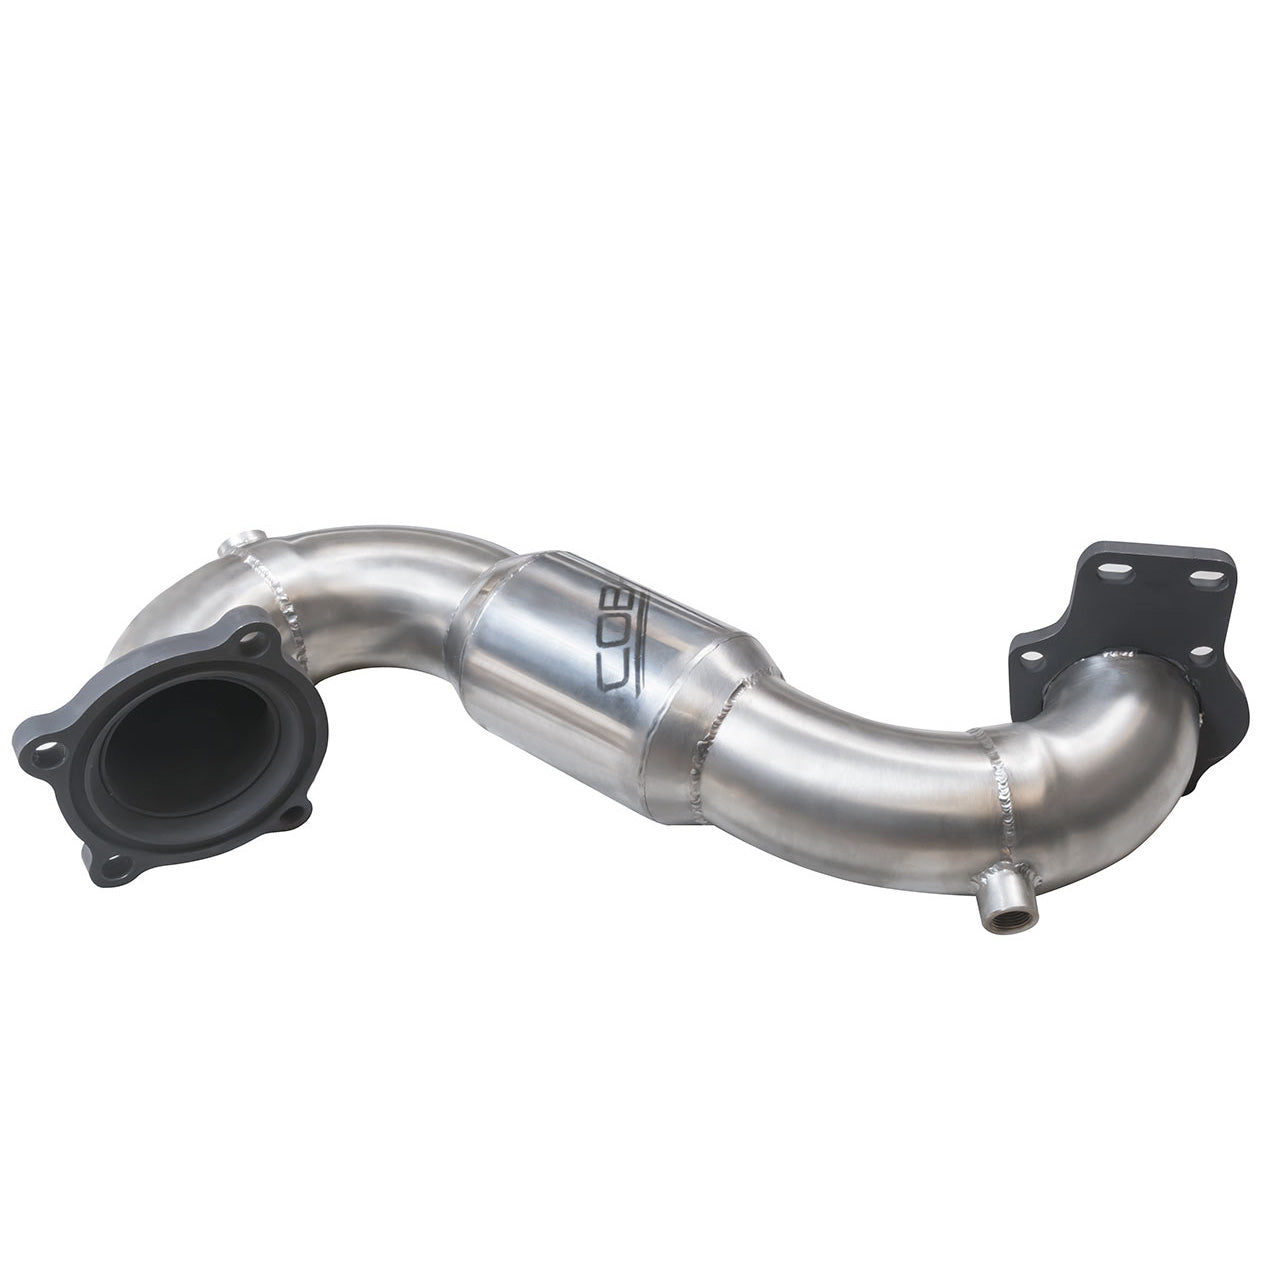 Vauxhall Astra J VXR (12-19) Front Pipe & Primary Sports Cat / De-Cat Exhaust